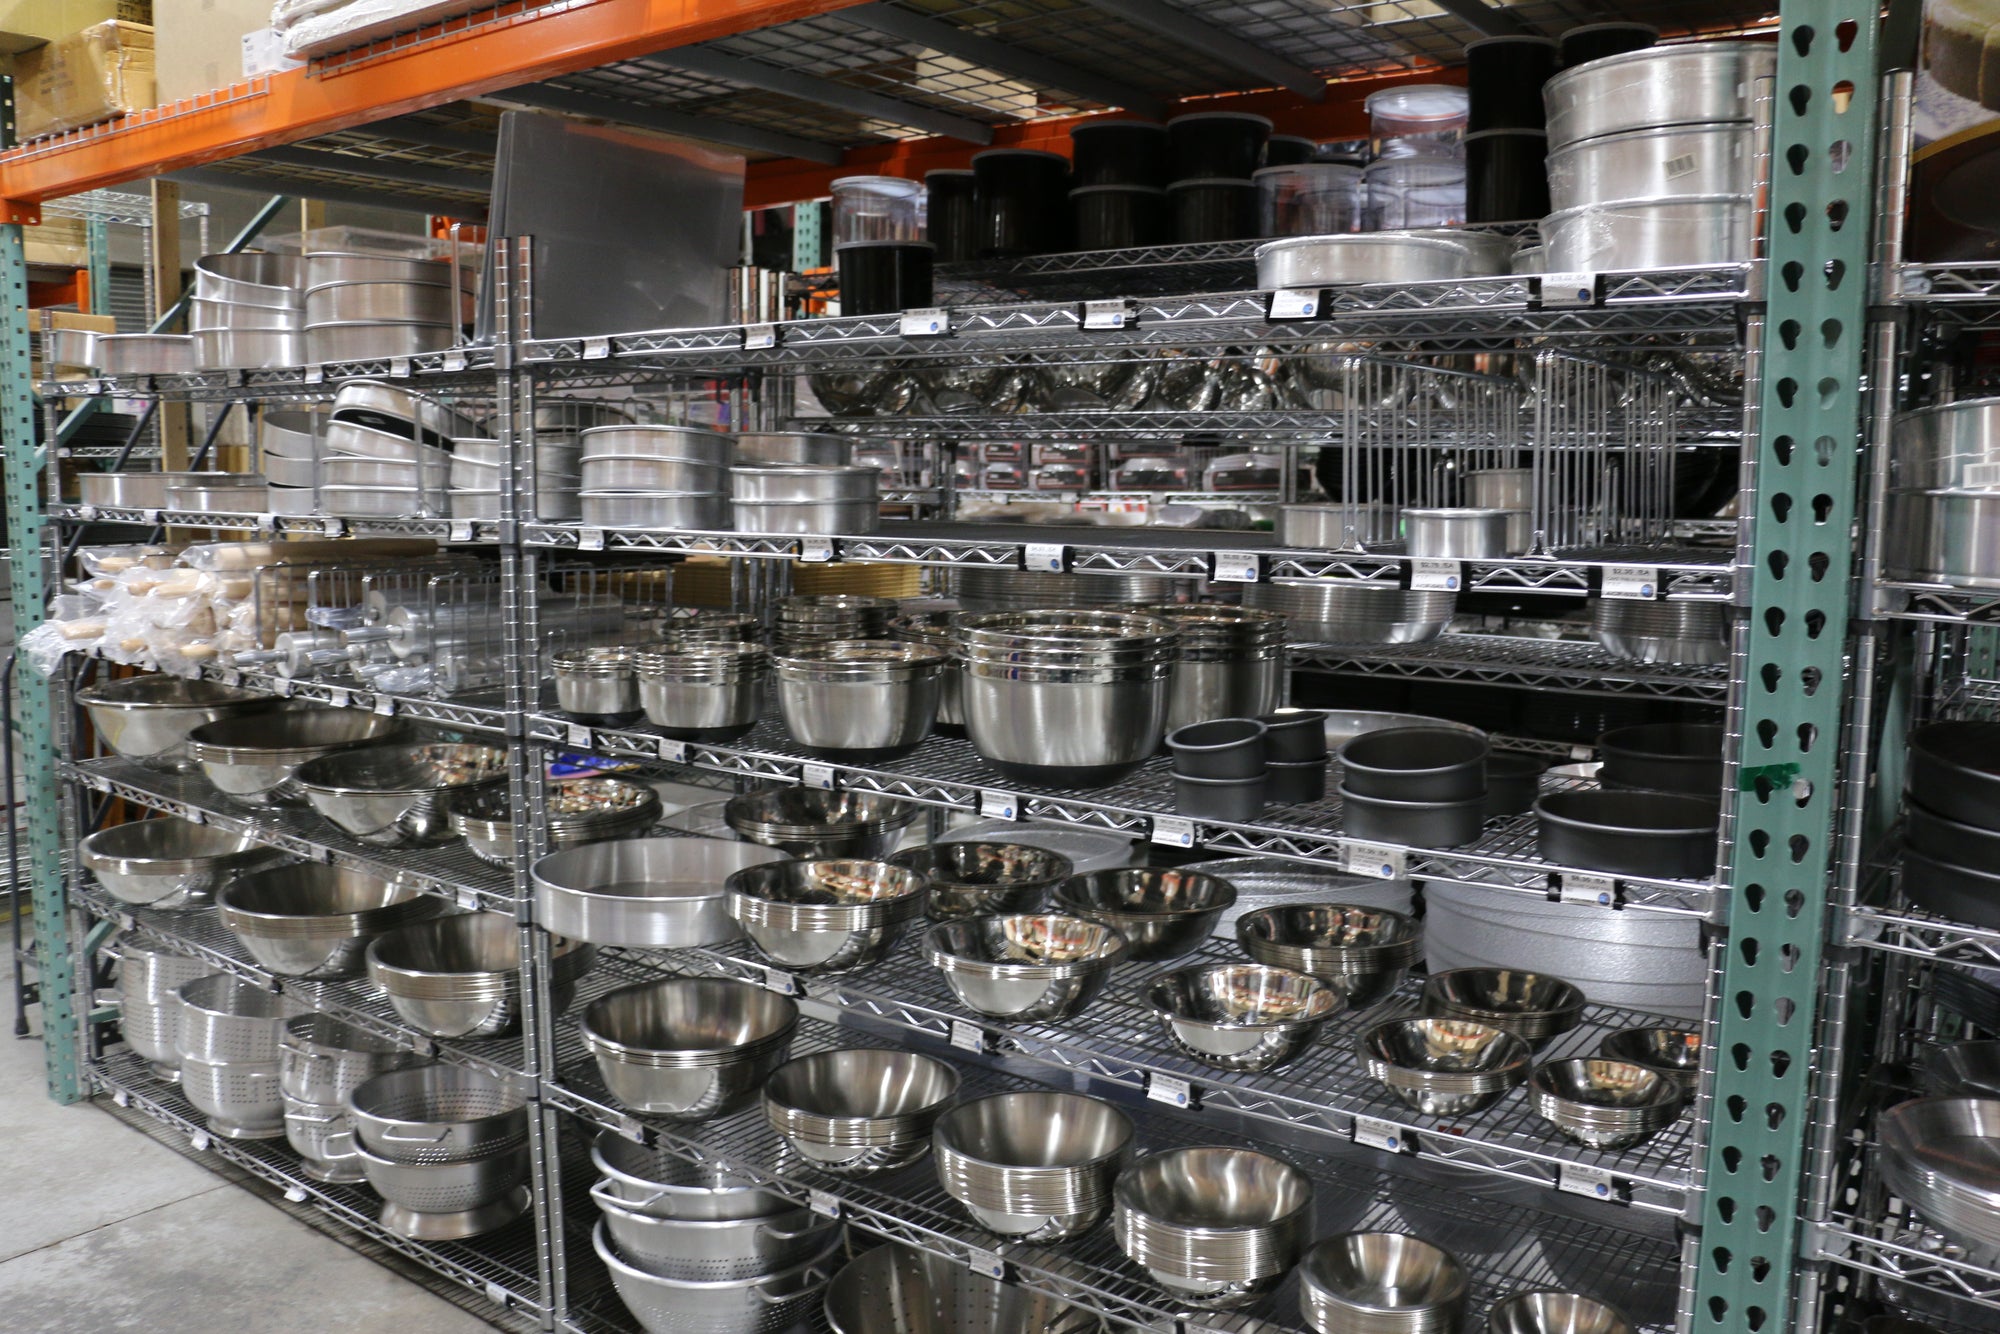 All the mixing bowls, pans, trays that your restaurant needs!